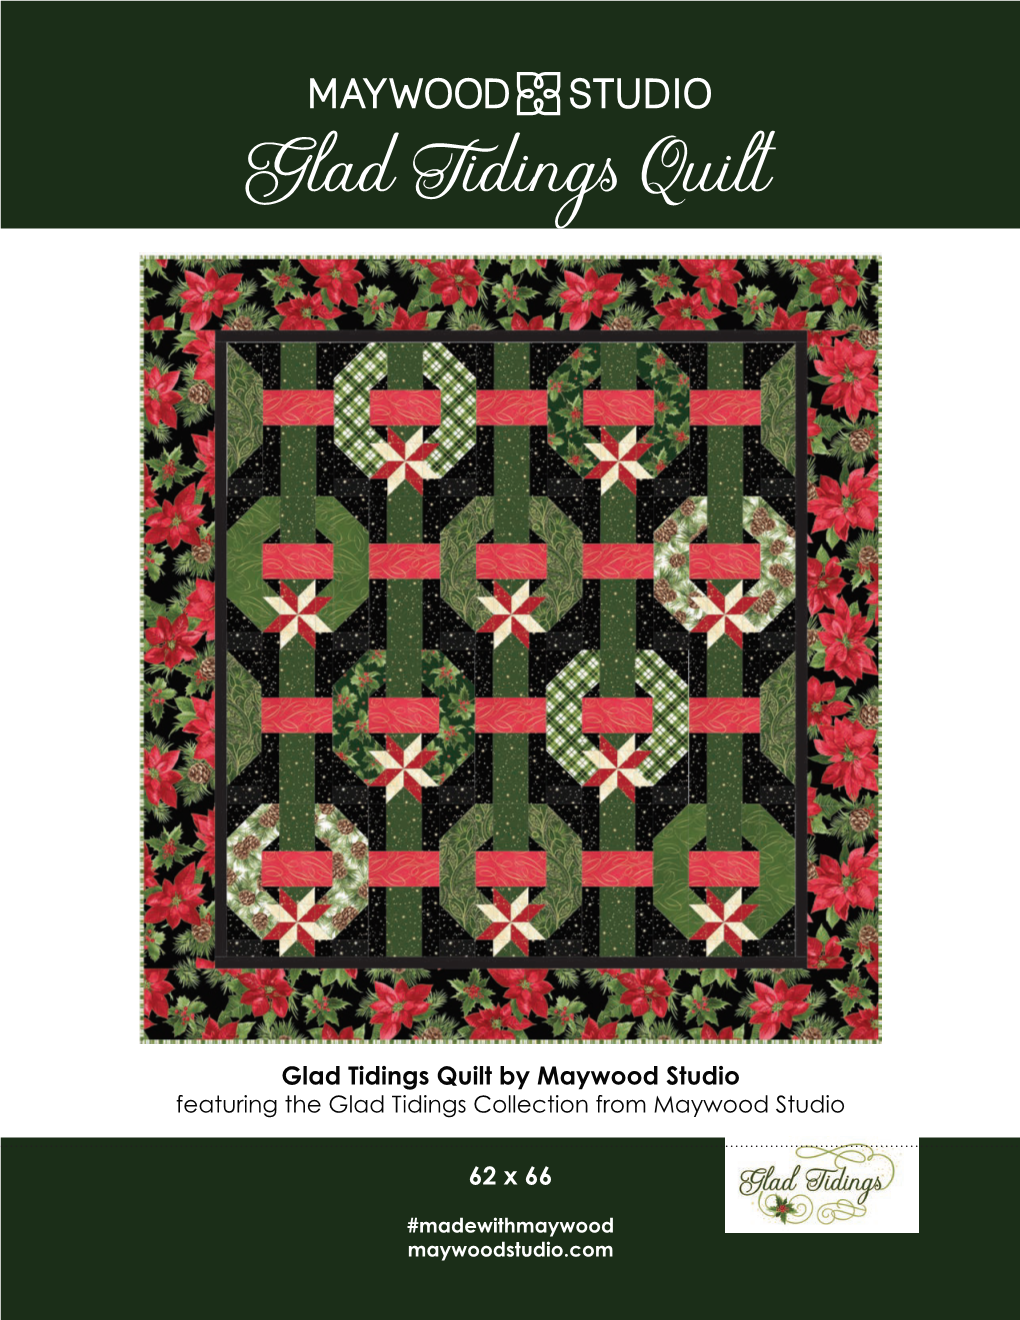 62 X 66 Glad Tidings Quilt by Maywood Studio